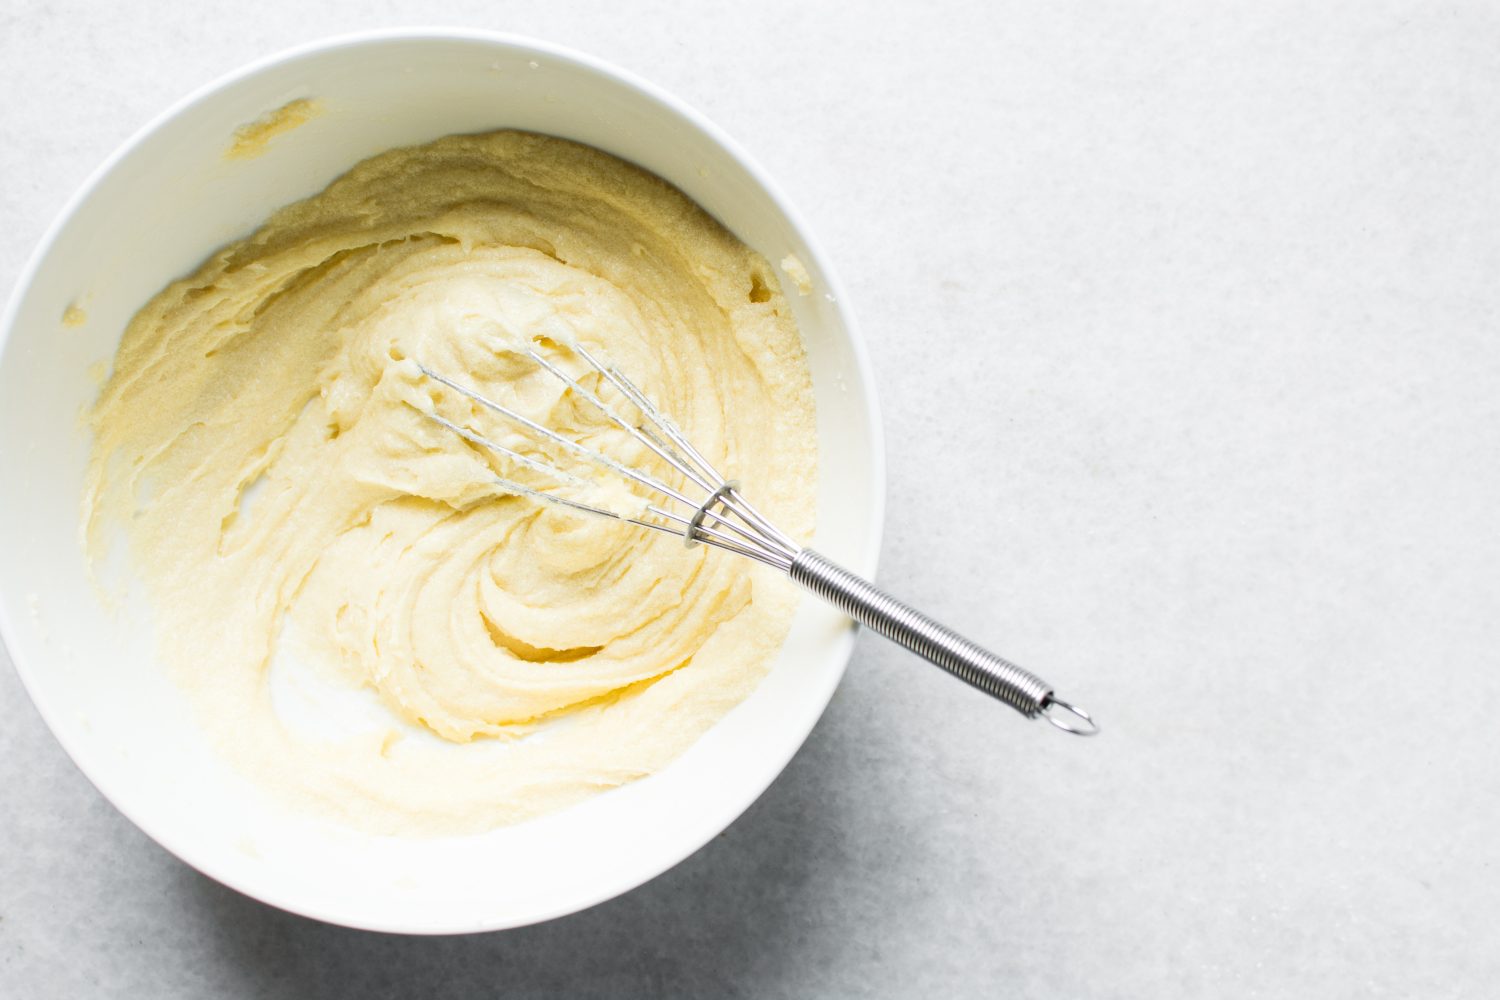 Top view of Creaming butter and sugar with a whisk, the process of making a cake, overhead view of mixing butter and sugar to make a pound cake